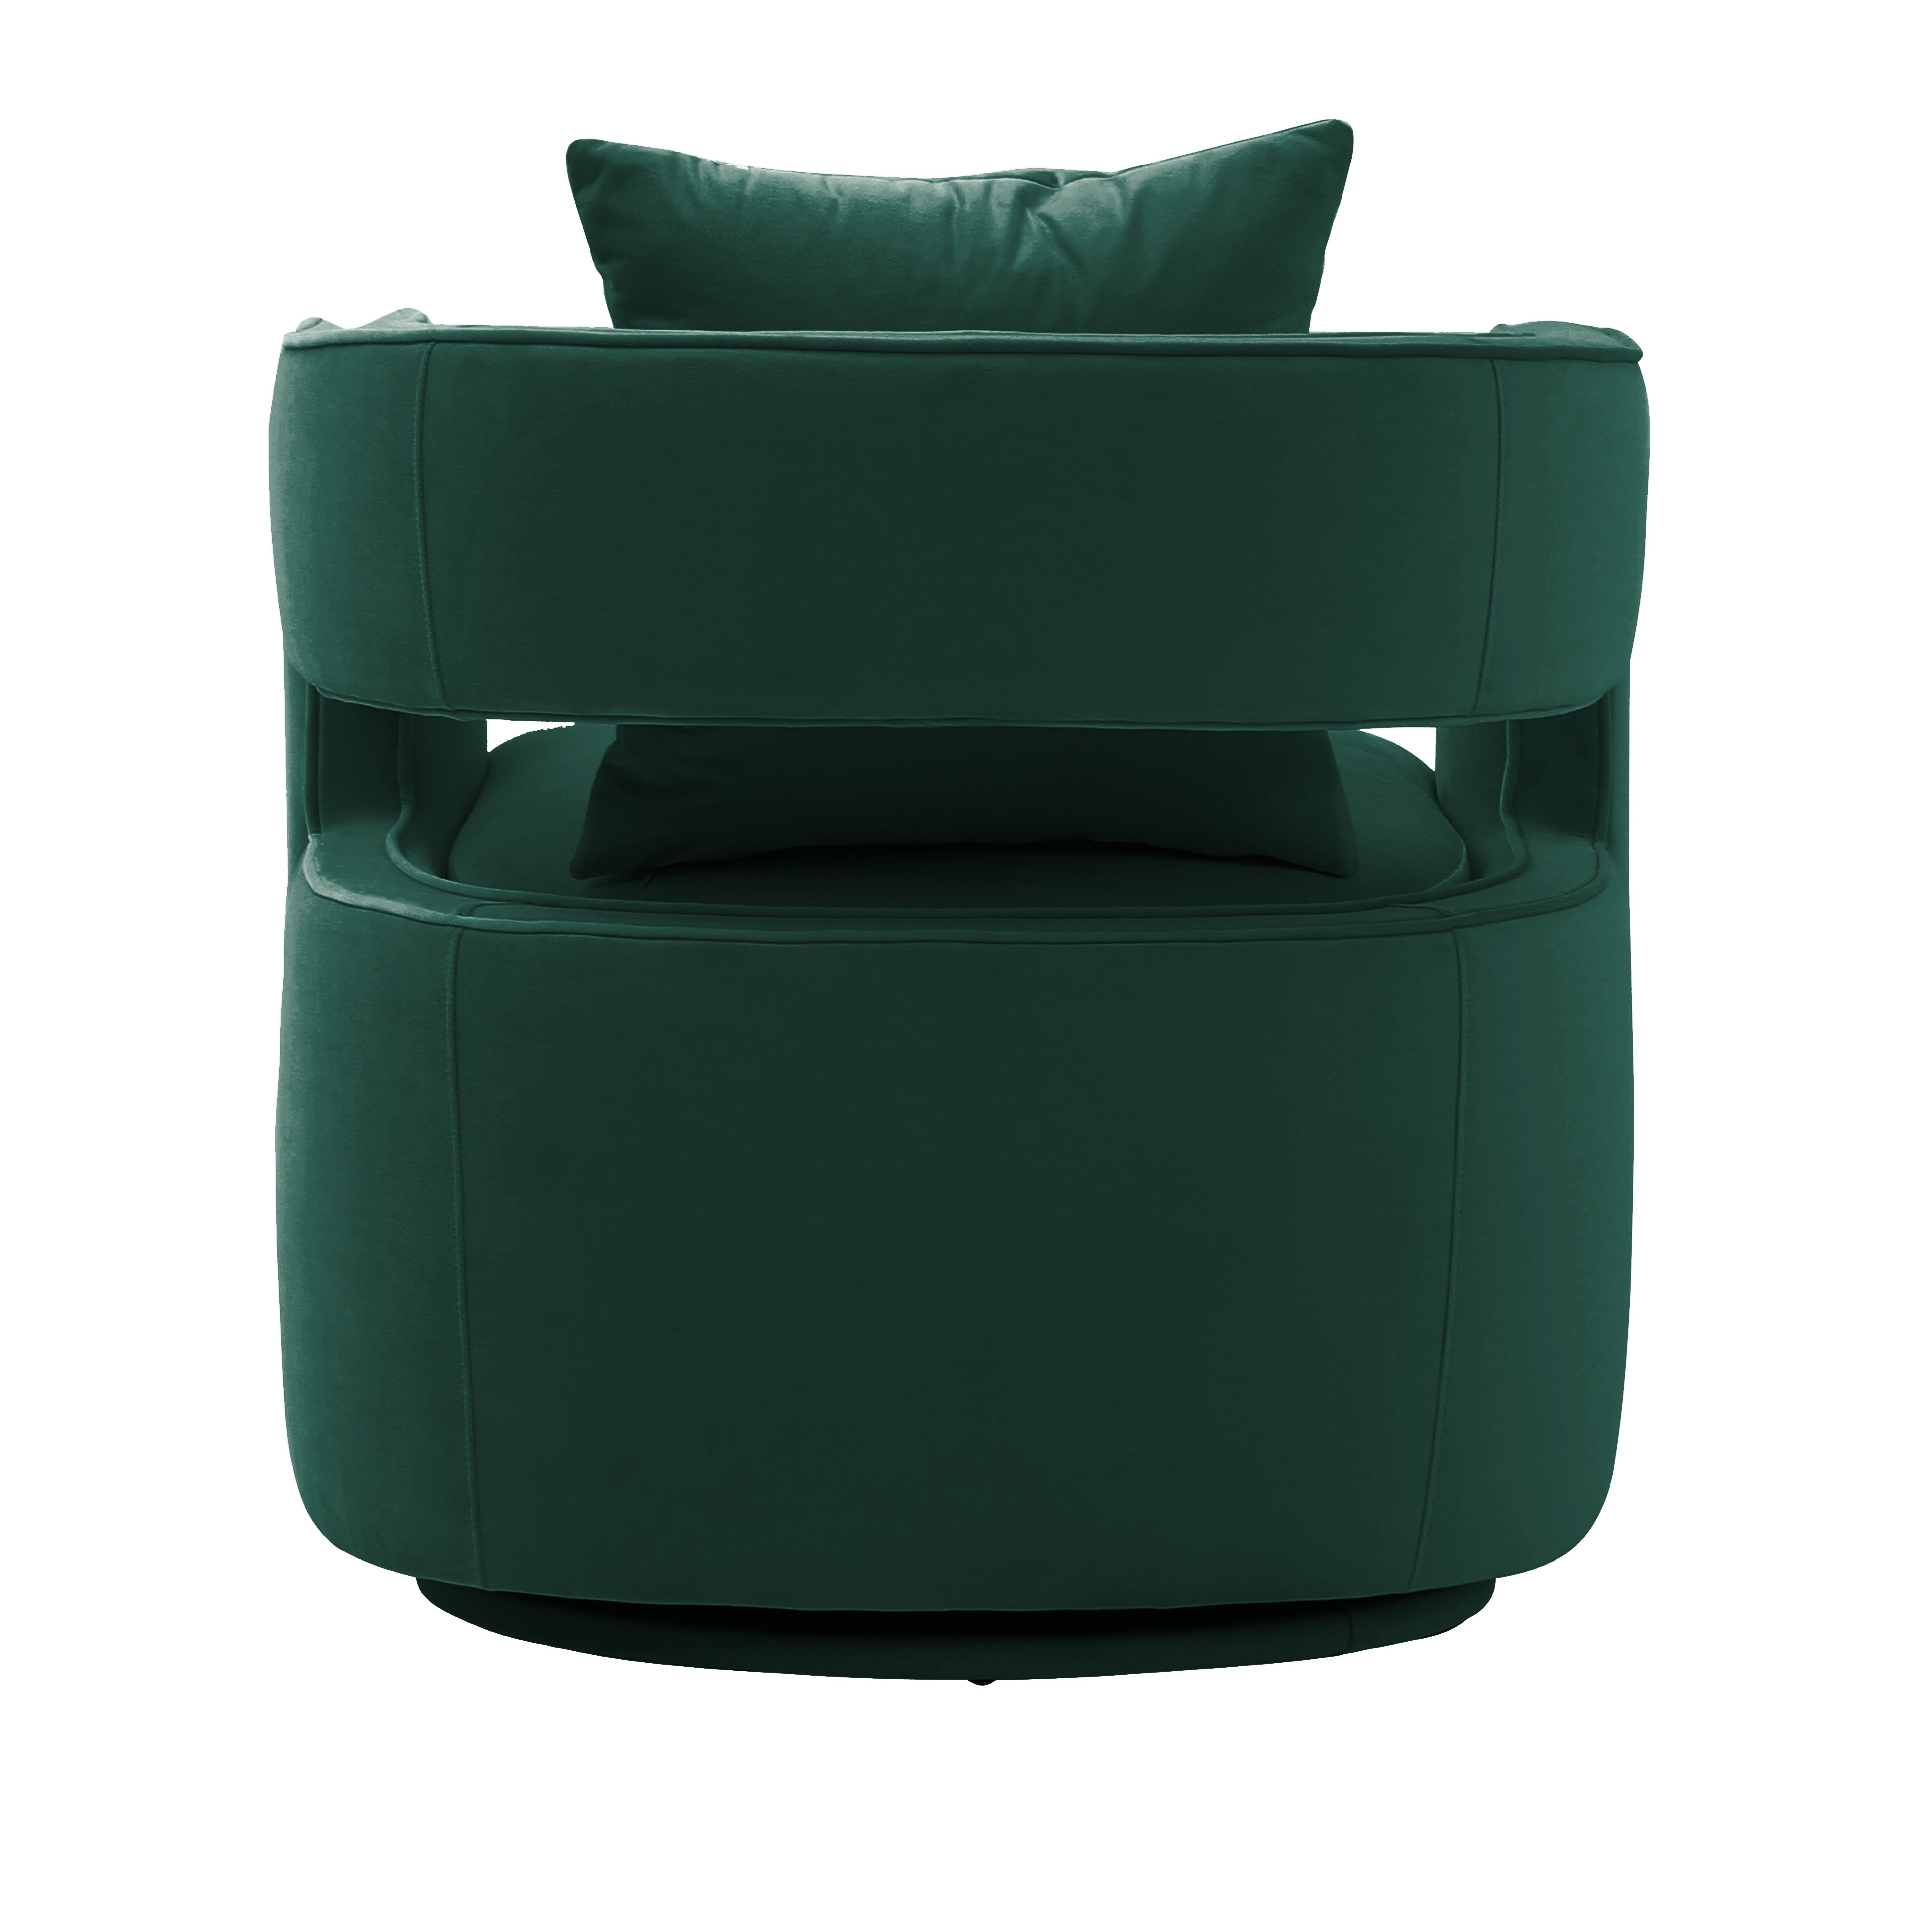 Kennedy Forest Green Swivel Chair - Image 2